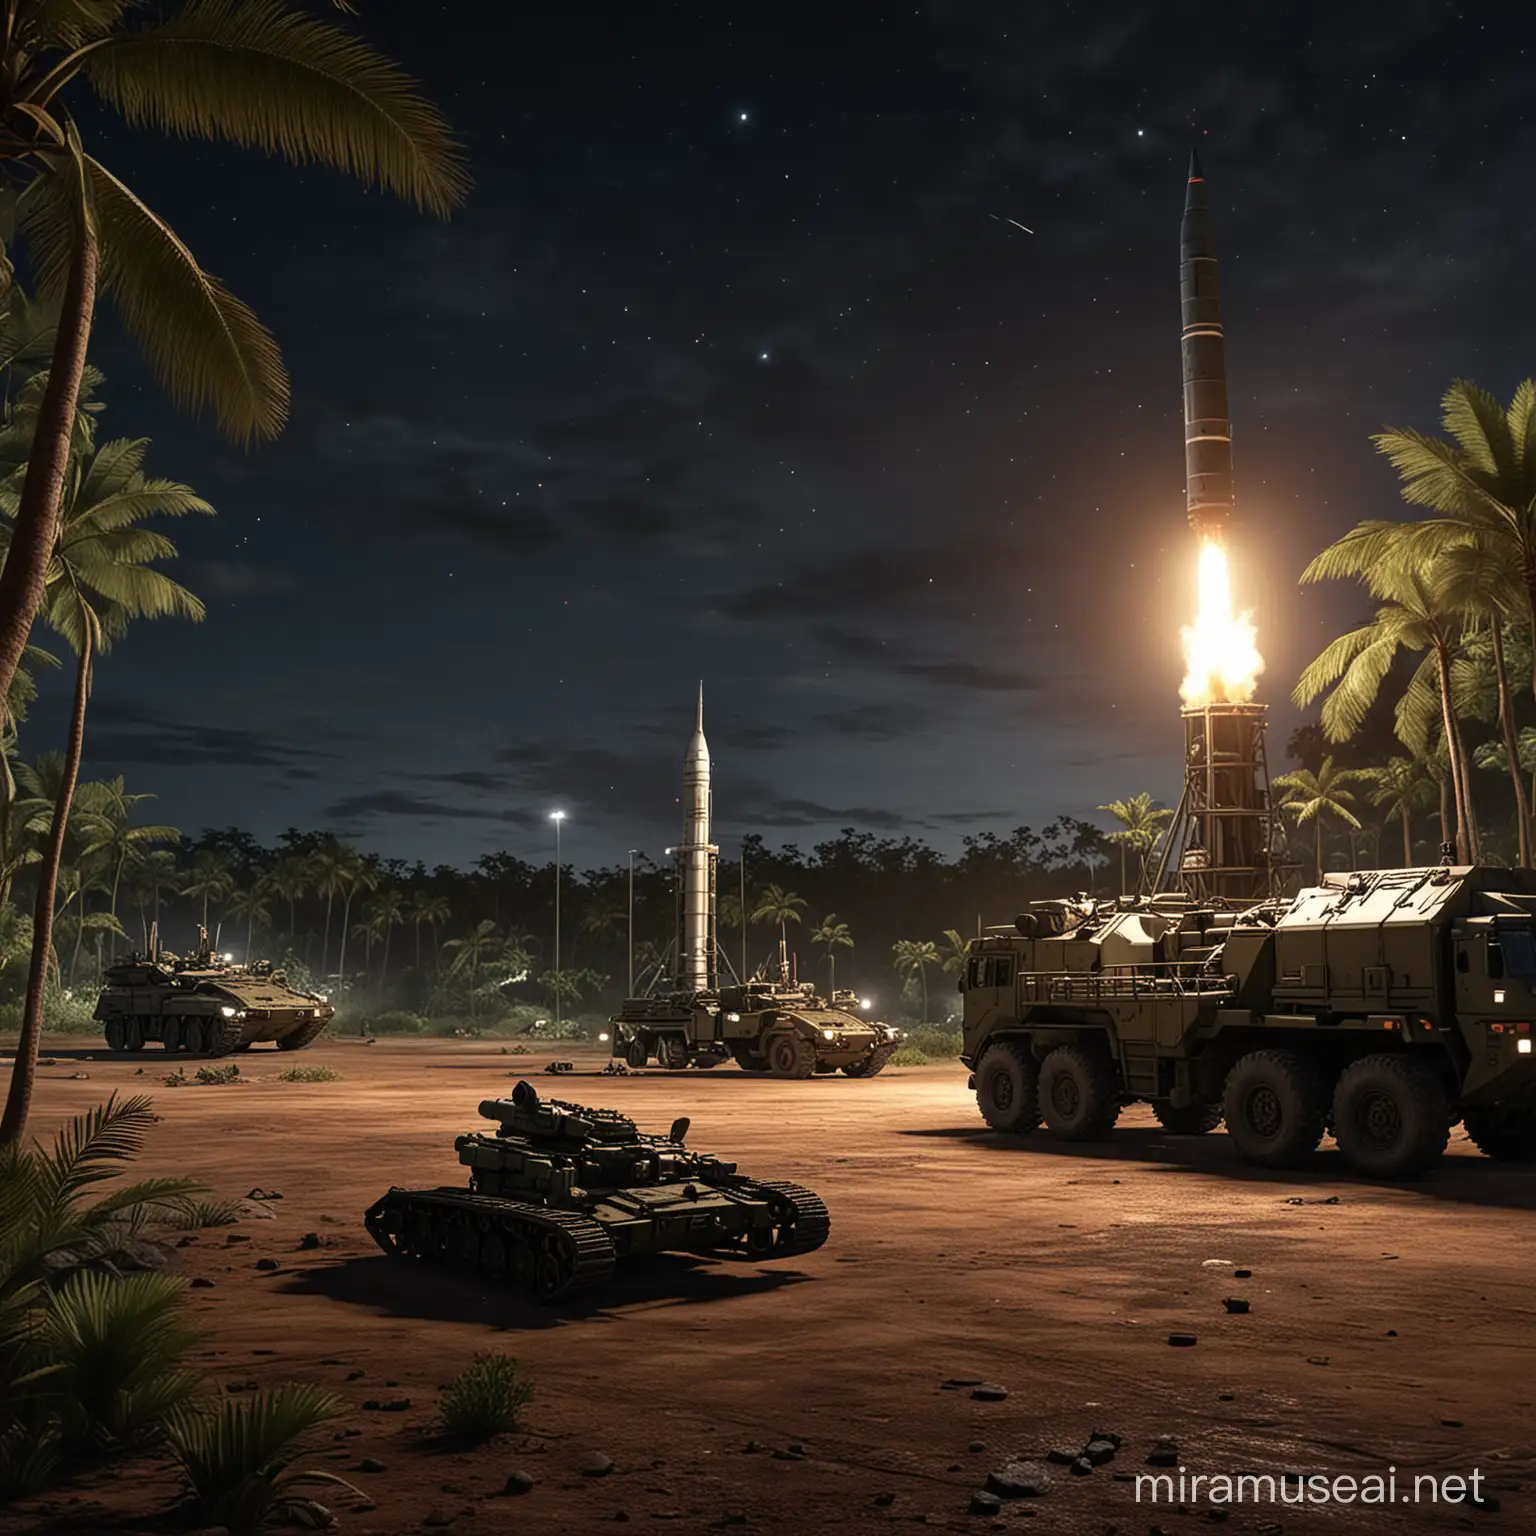 Realistic Missile System Launch Pad Vehicles at Night in Tropical Military Base